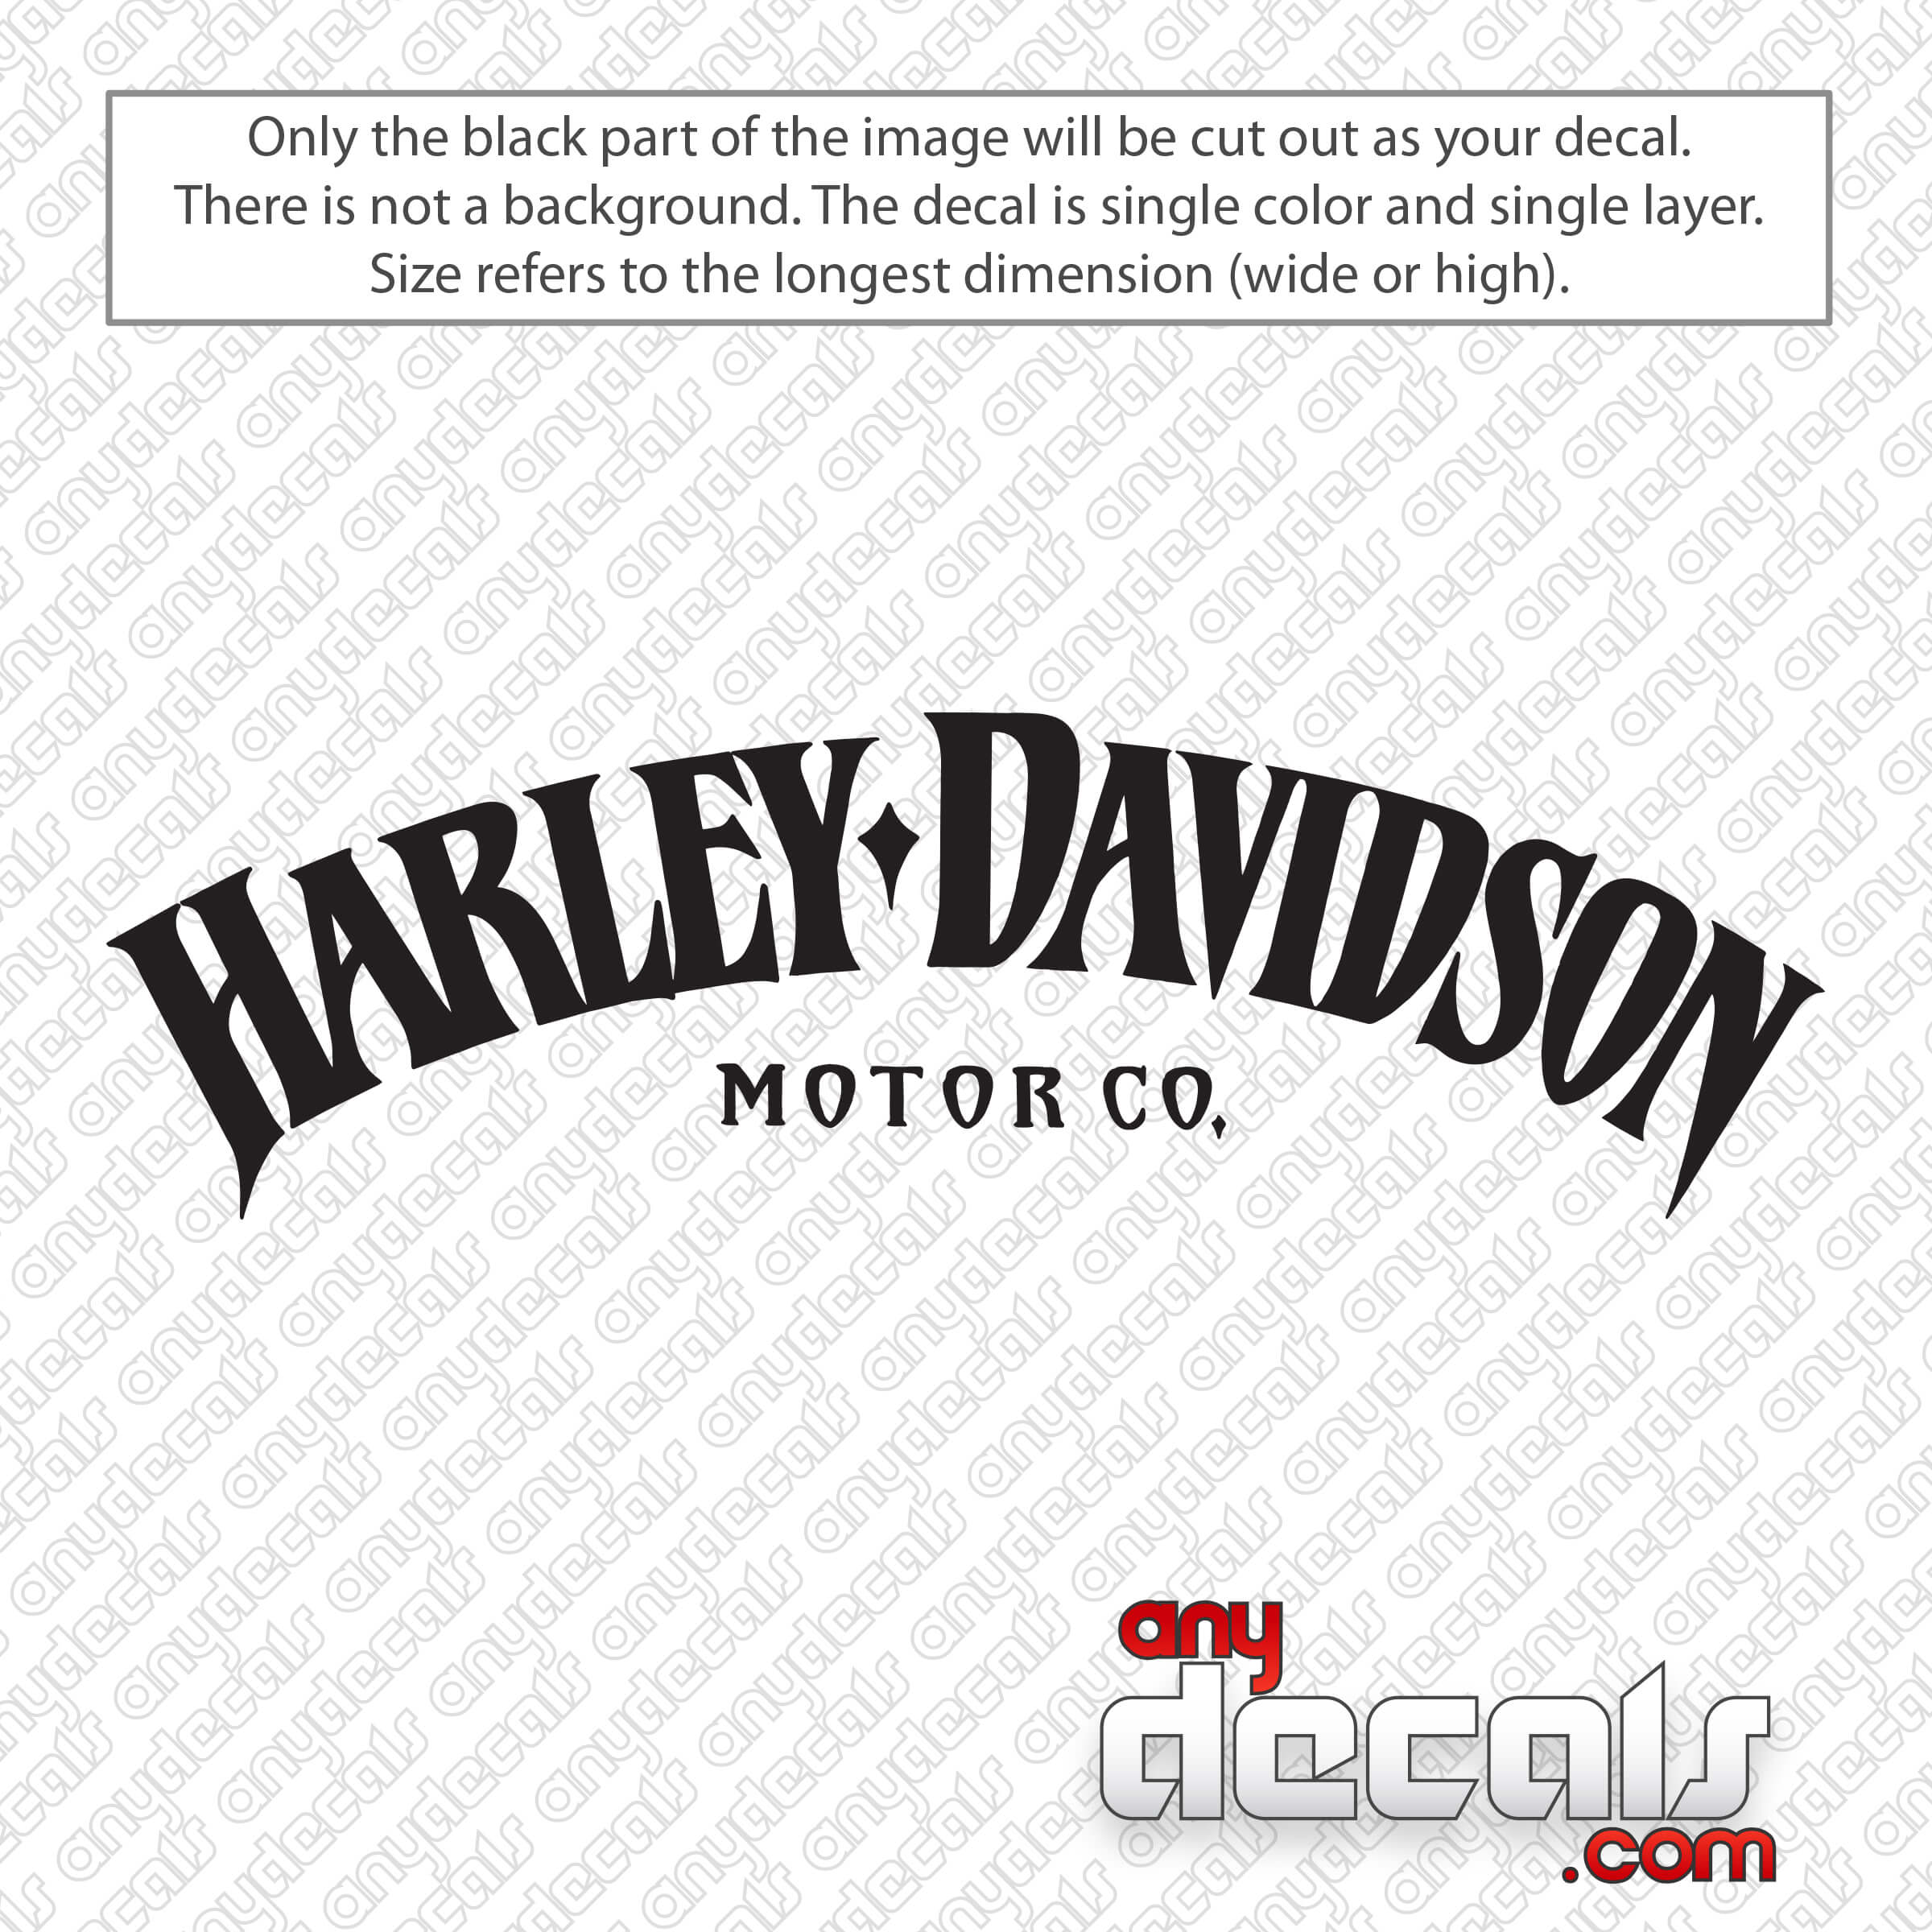 Harley Davidson Bar & Shield Sticker Vinyl Decal Logo Pick Your Color and  Size